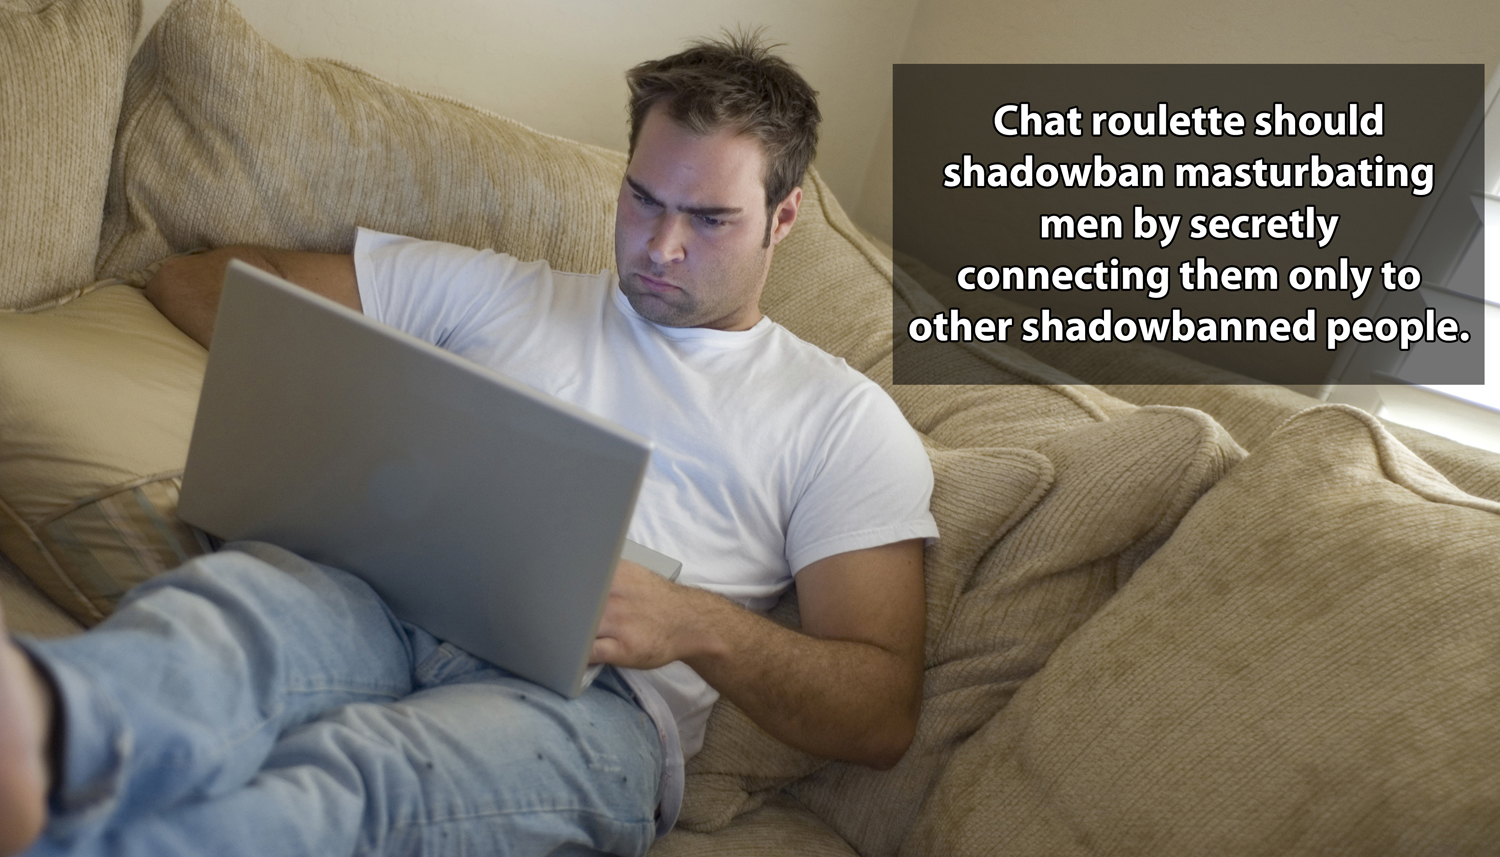 photo caption - Chat roulette should shadowban masturbating men by secretly connecting them only to other shadowbanned people.